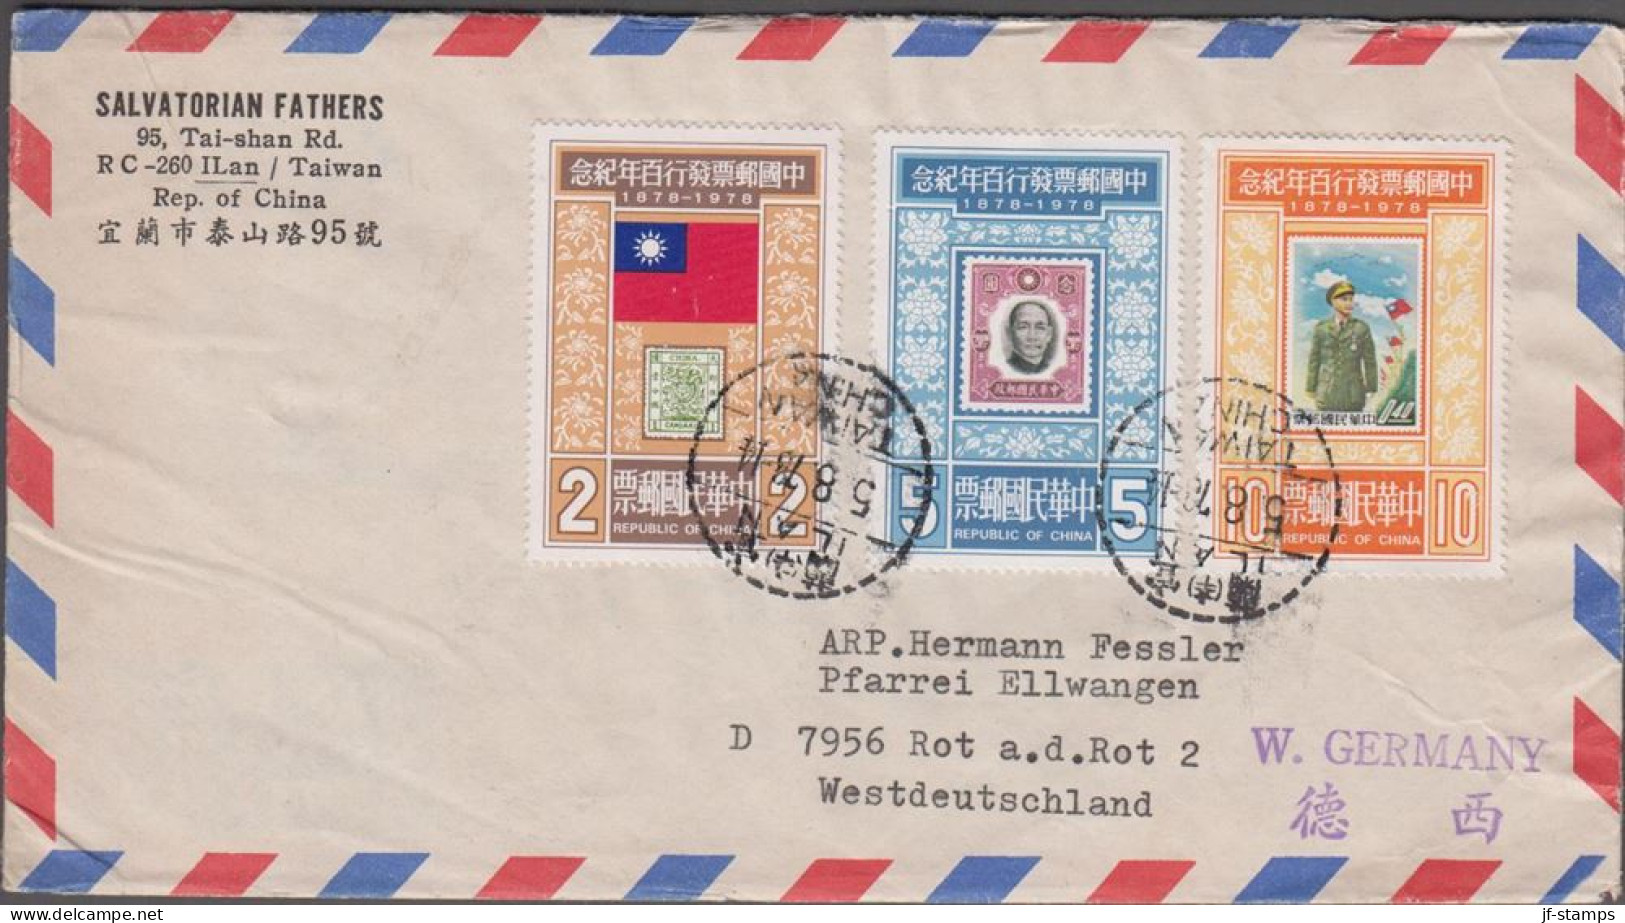 1978. TAIWAN. Complete Set 100 Years Stamps From China On Cover To Germany Cancelled TAIWAN 5 8 78. Sender... - JF524473 - Lettres & Documents